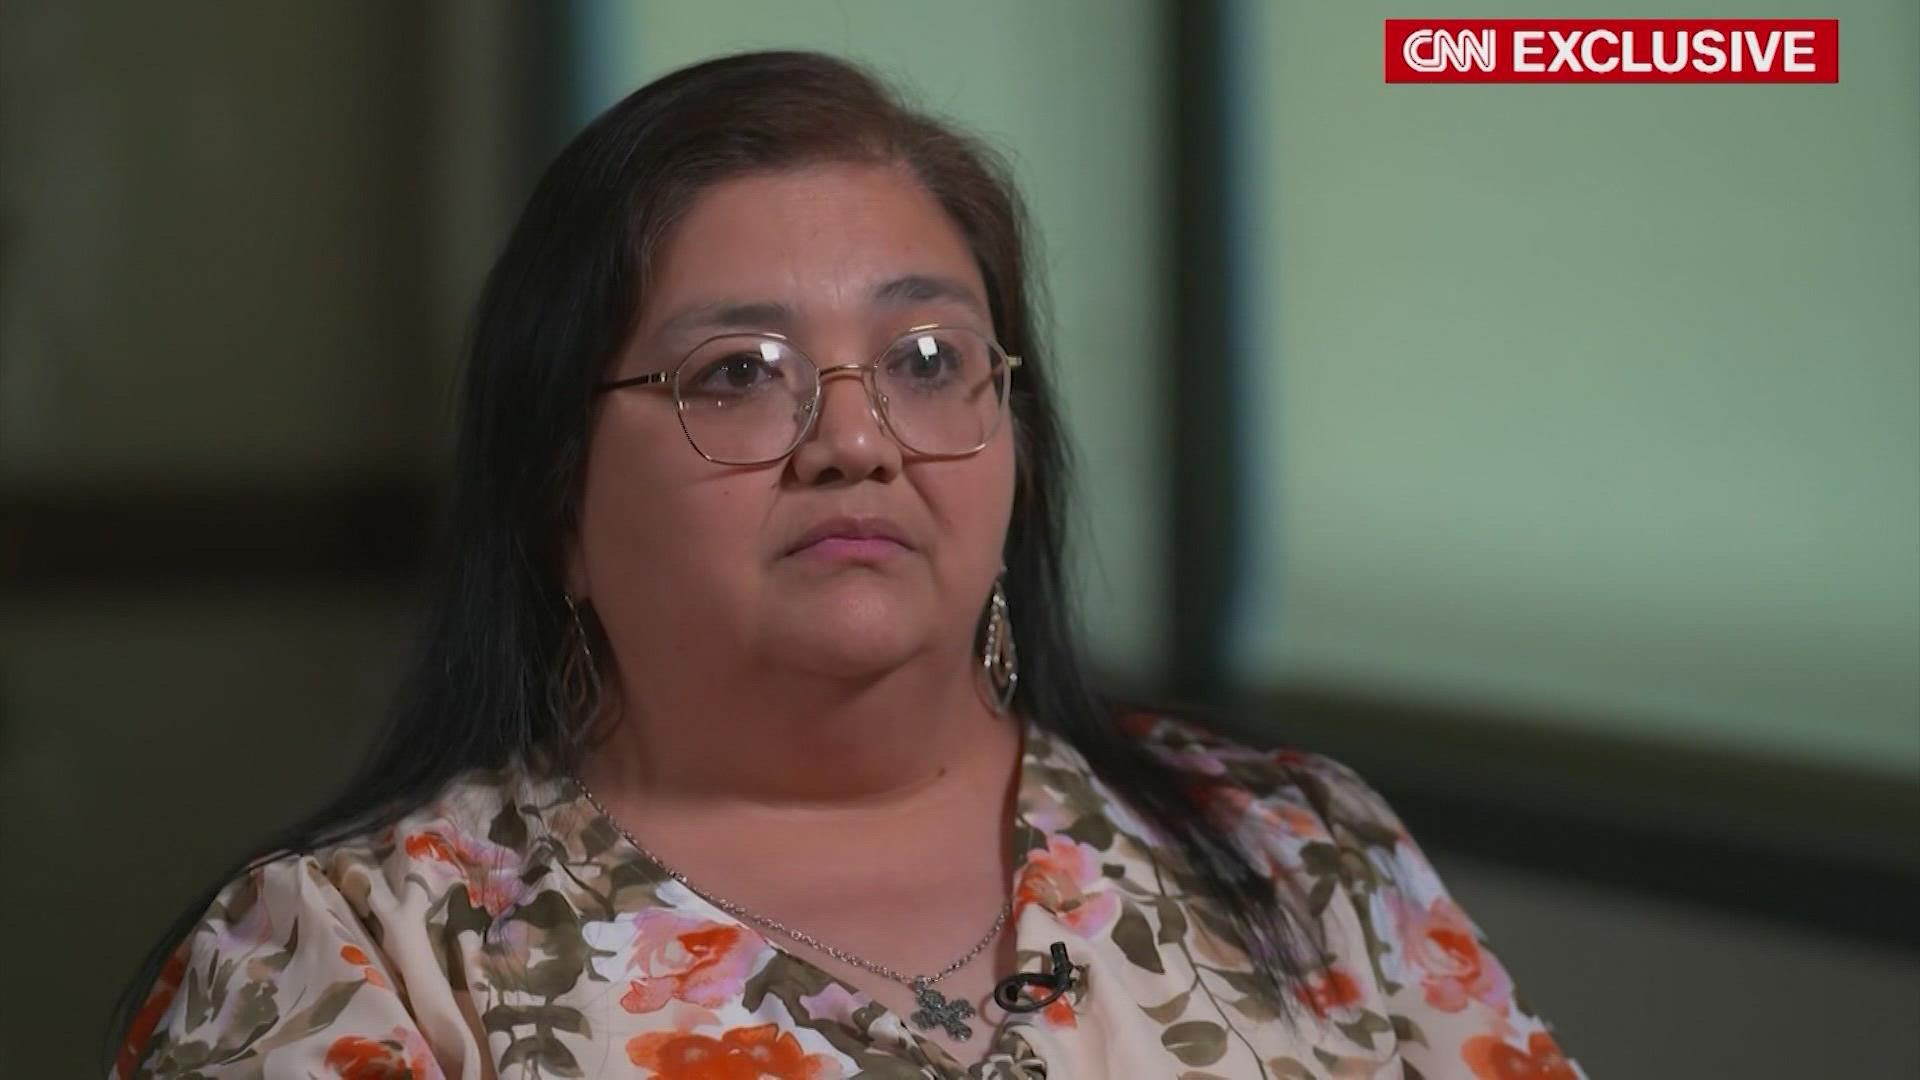 Mandy Gutierrez broke her silence in an interview with CNN. She is defending her actions during the mass shooting inside the Uvalde school that left 21 dead.